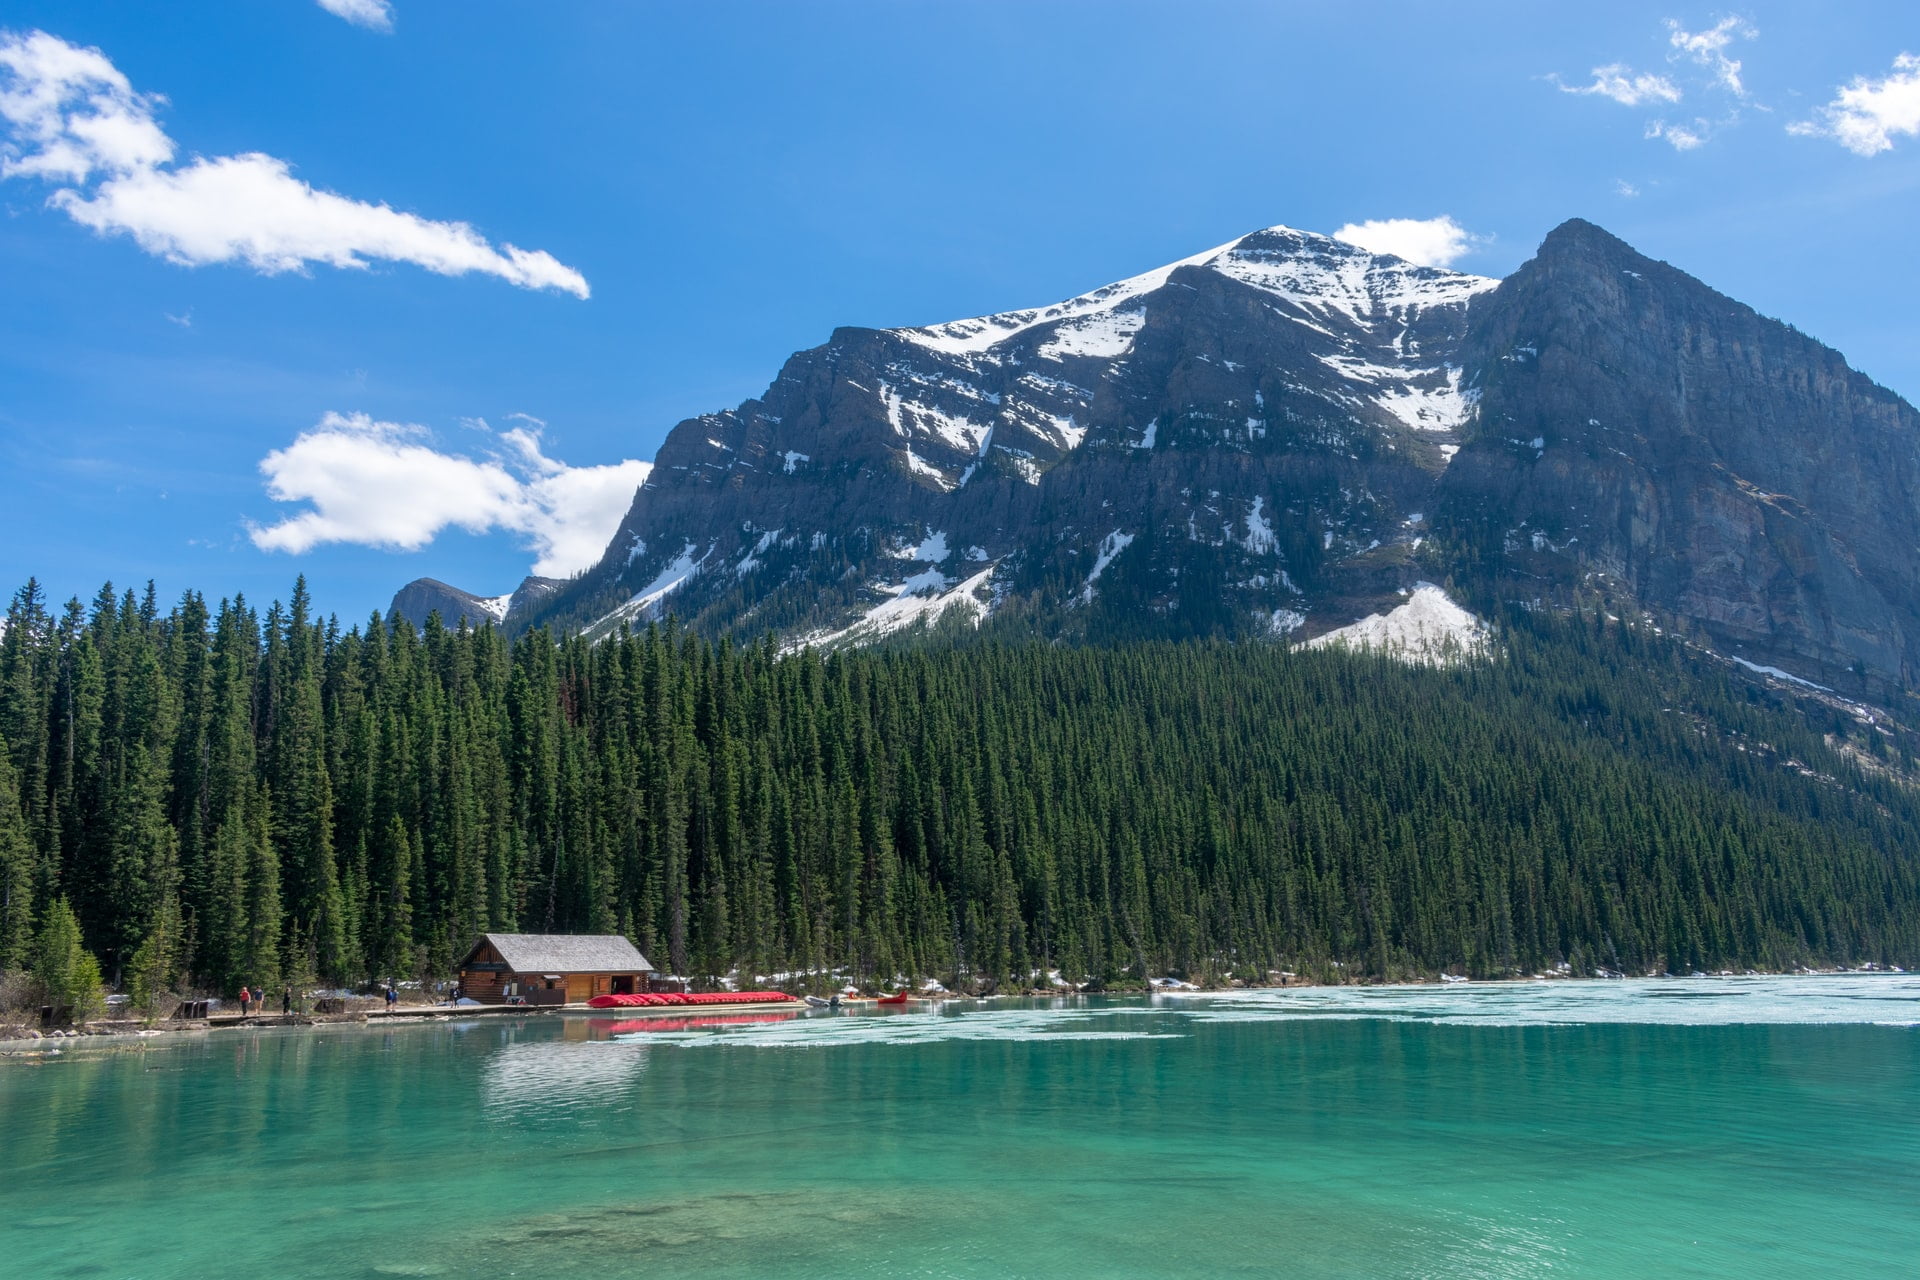 Visiting Canada: Best Places to Spend Your Vacation